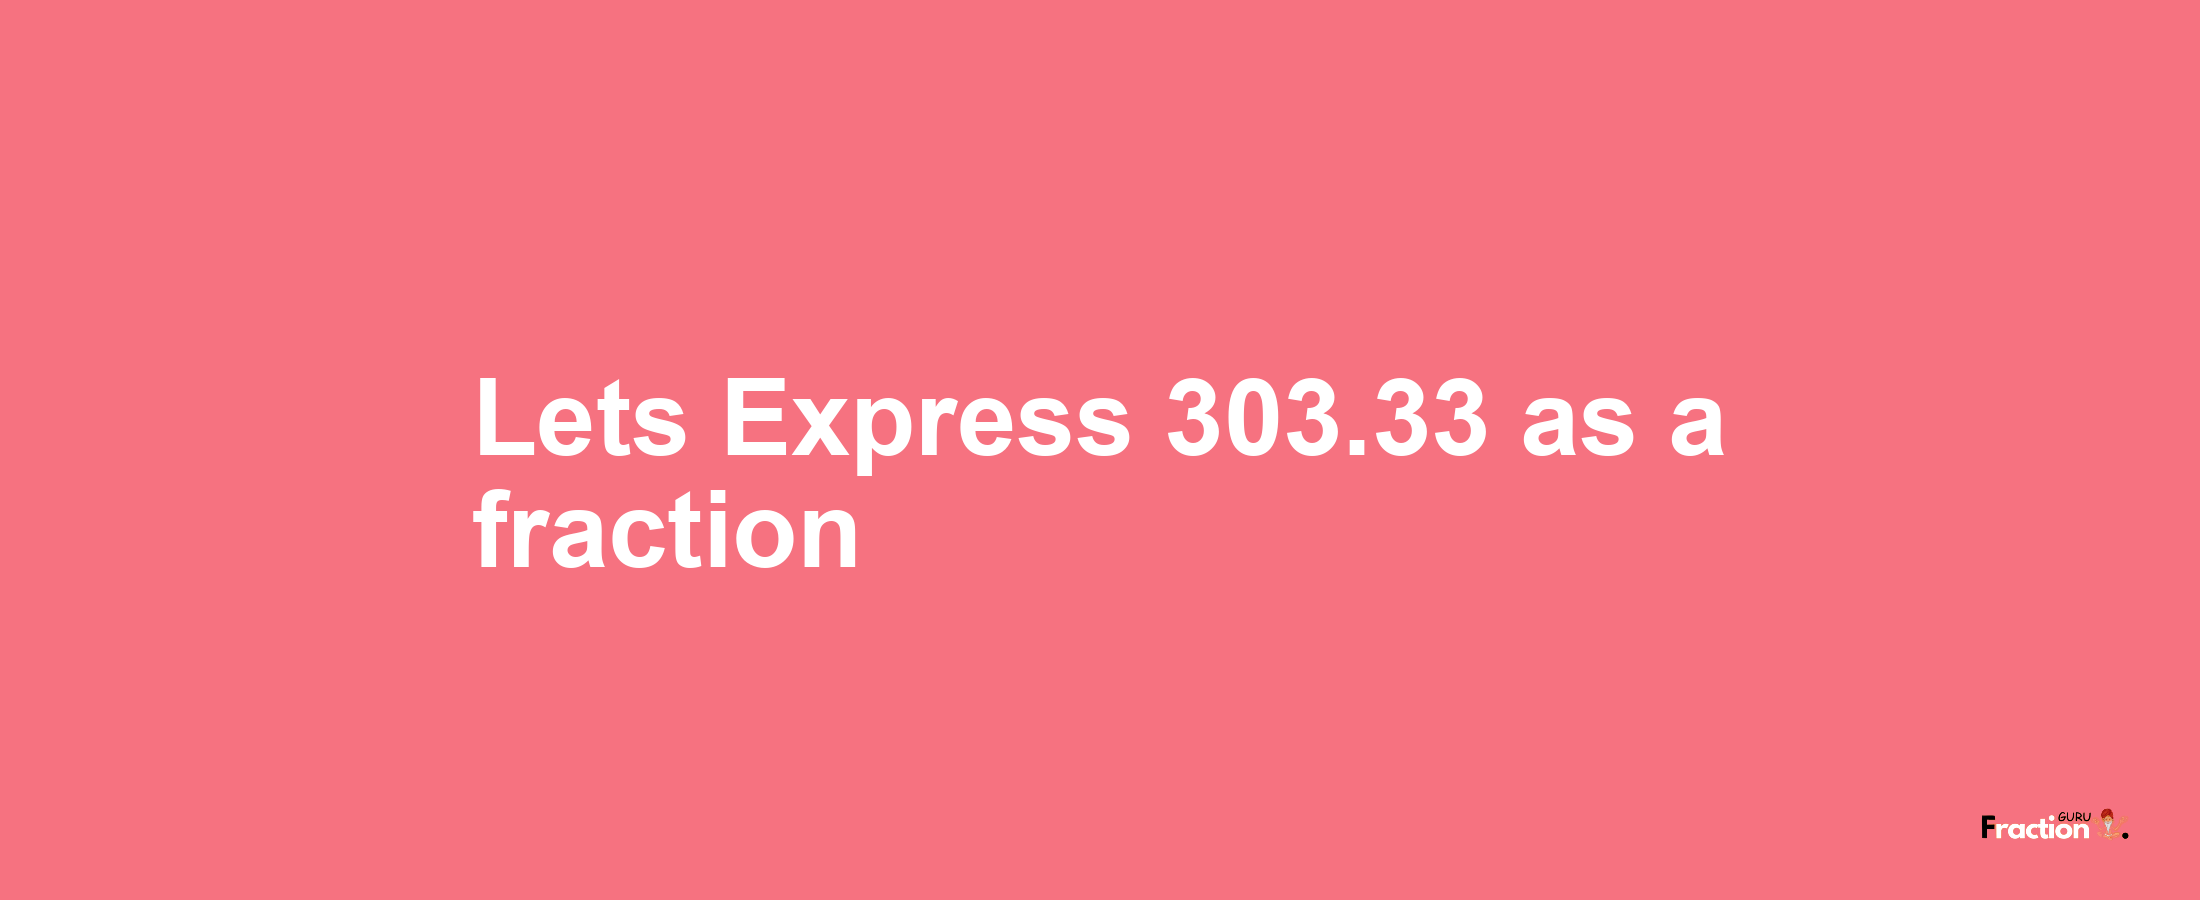 Lets Express 303.33 as afraction